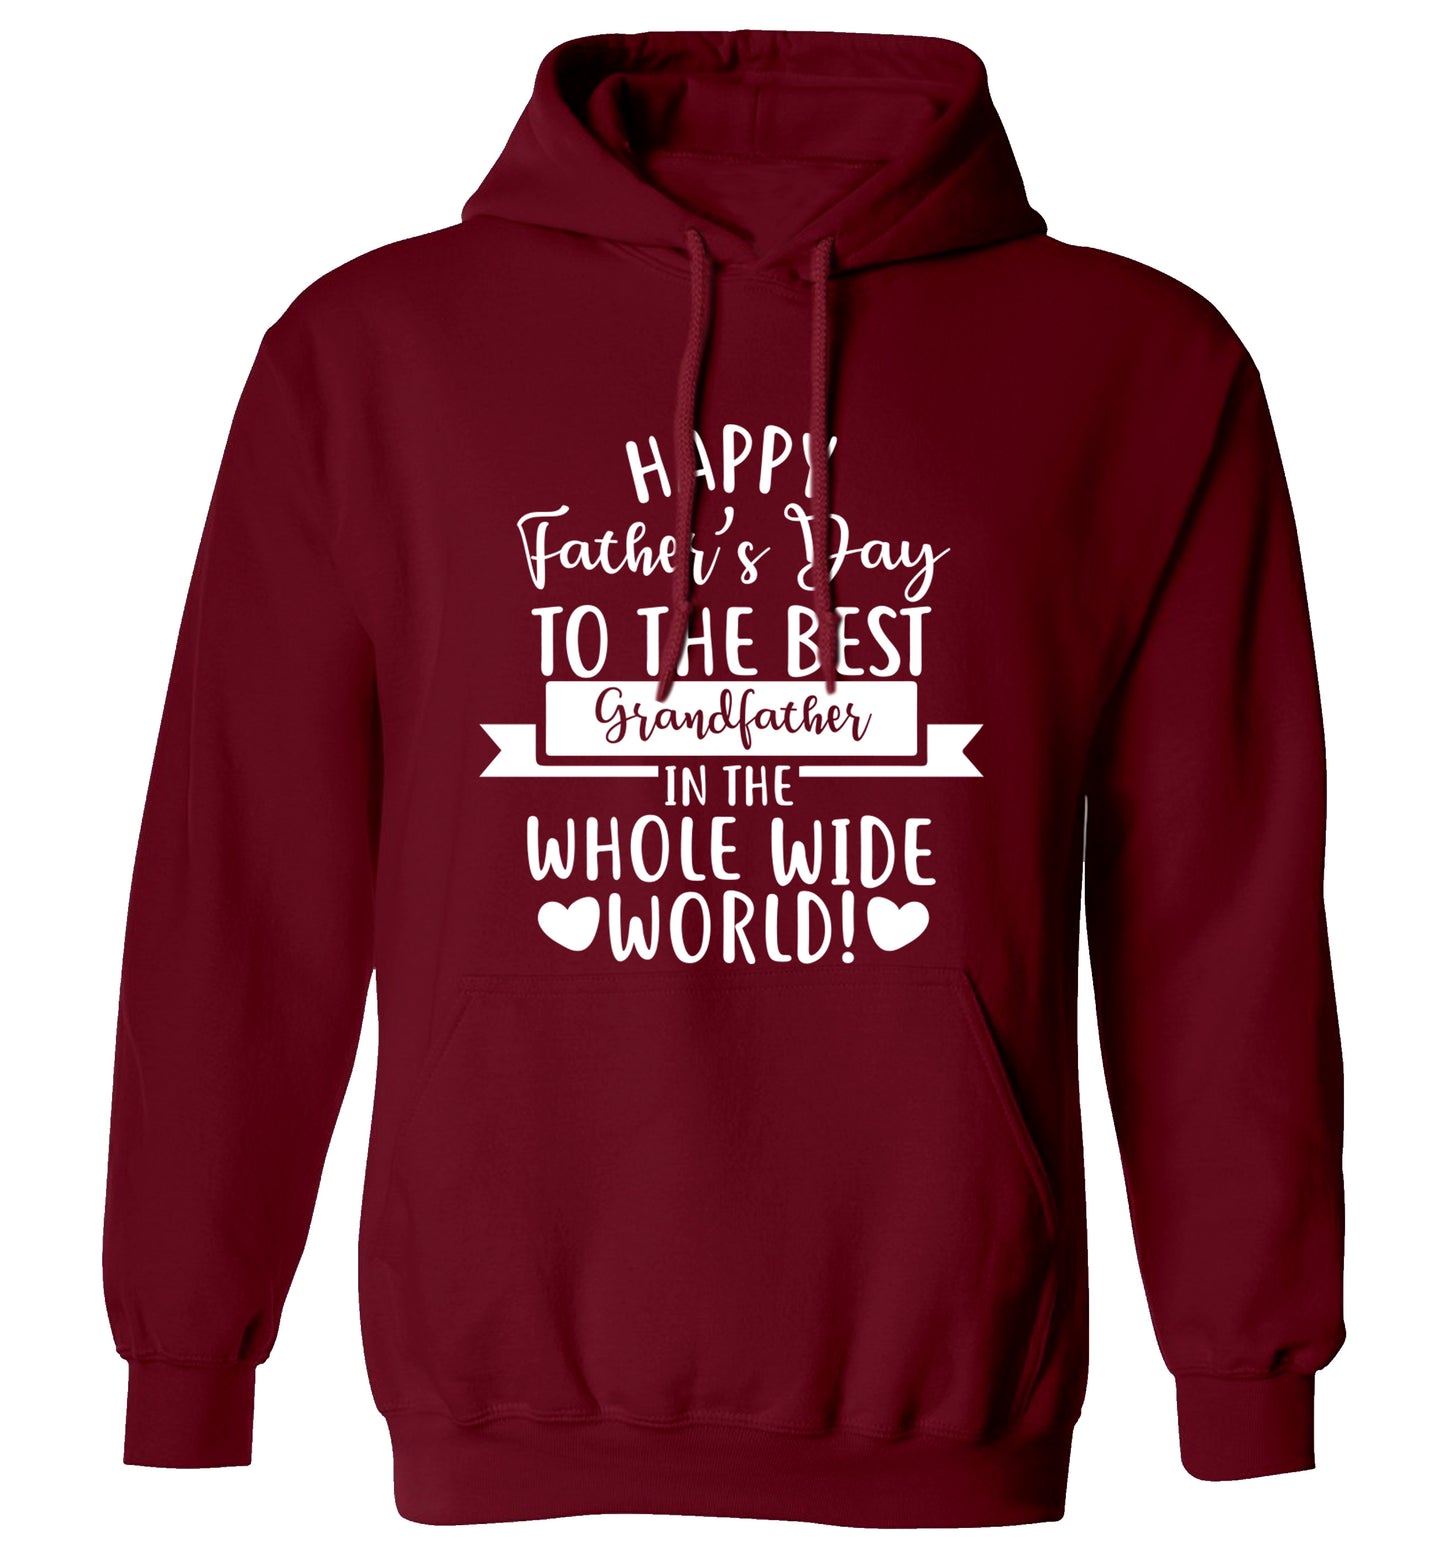 Happy Father's Day to the best grandfather in the world adults unisex maroon hoodie 2XL